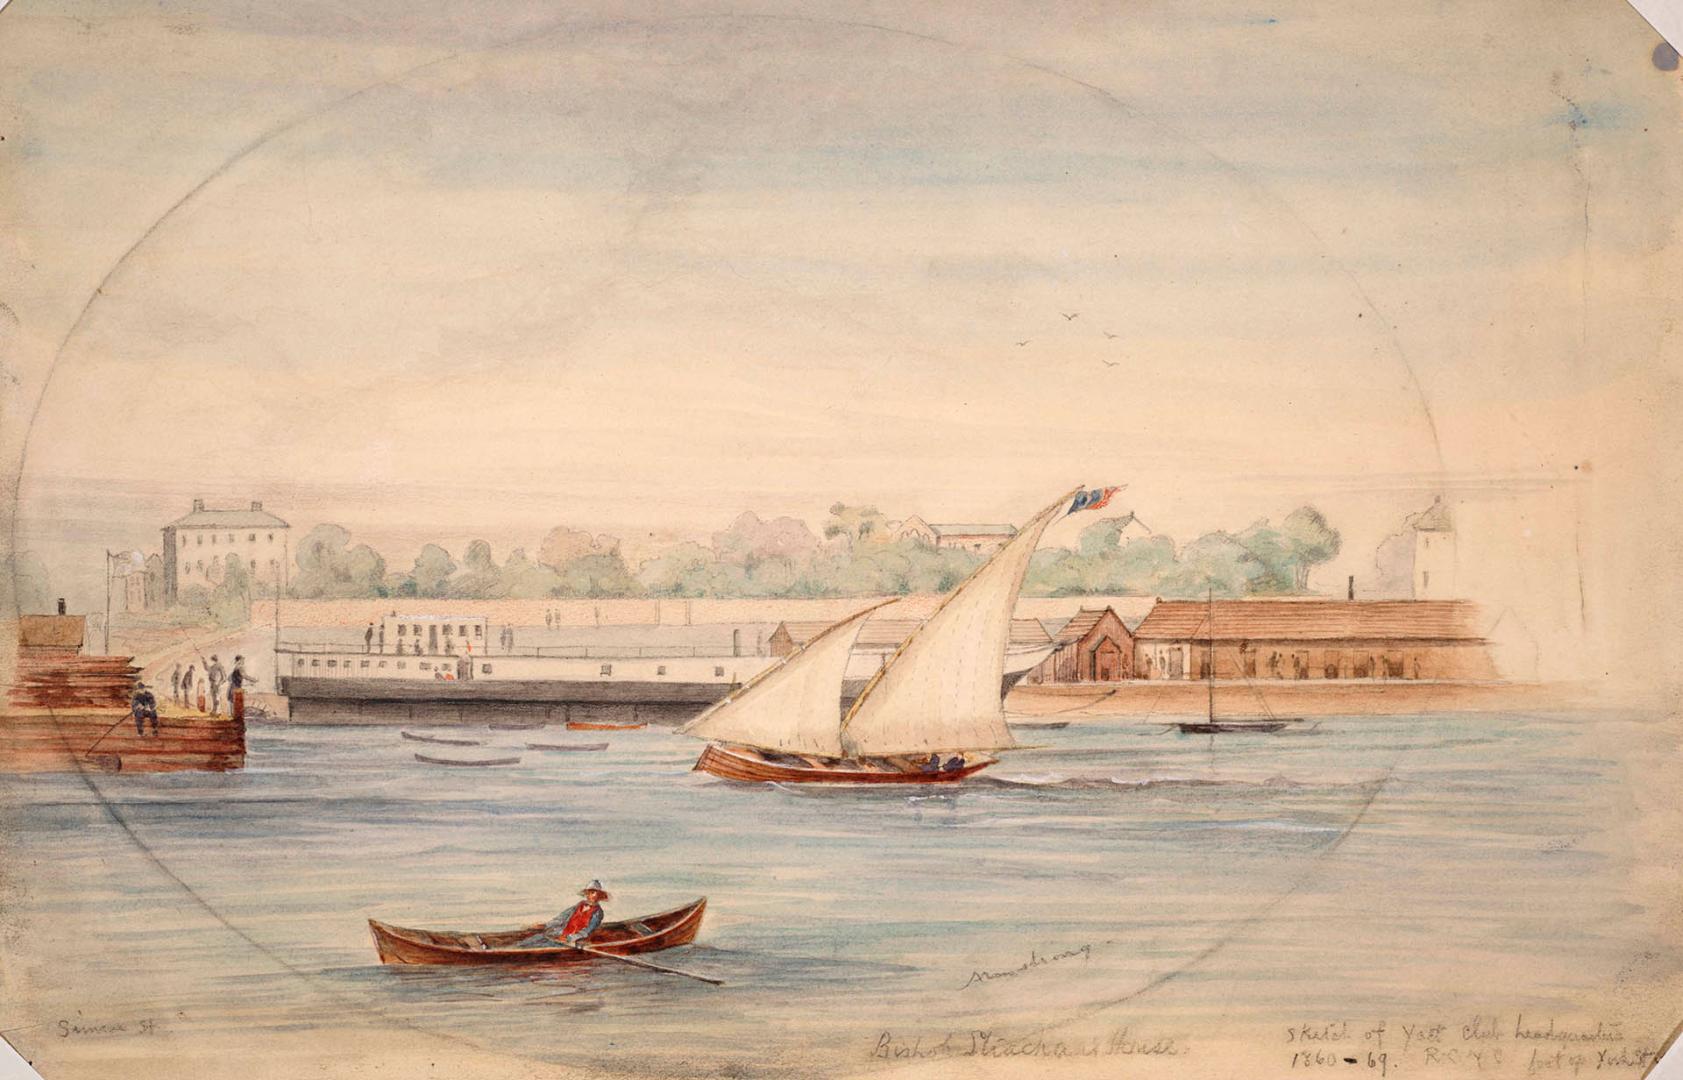 Painting shows a few boats on the lake with some buildings in the background.